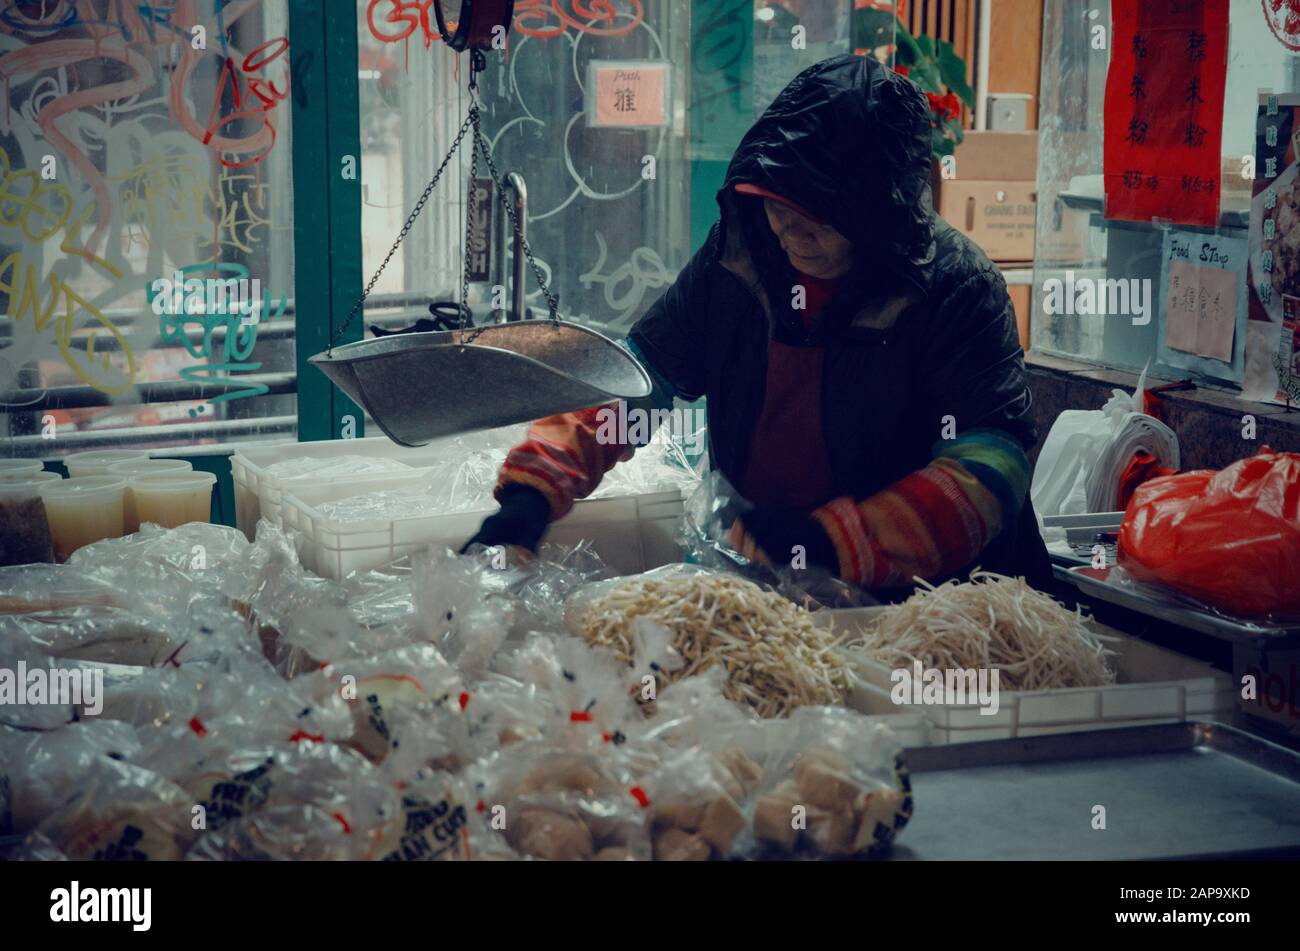 Seller serving food in a Street of Chinatown Stock Photo